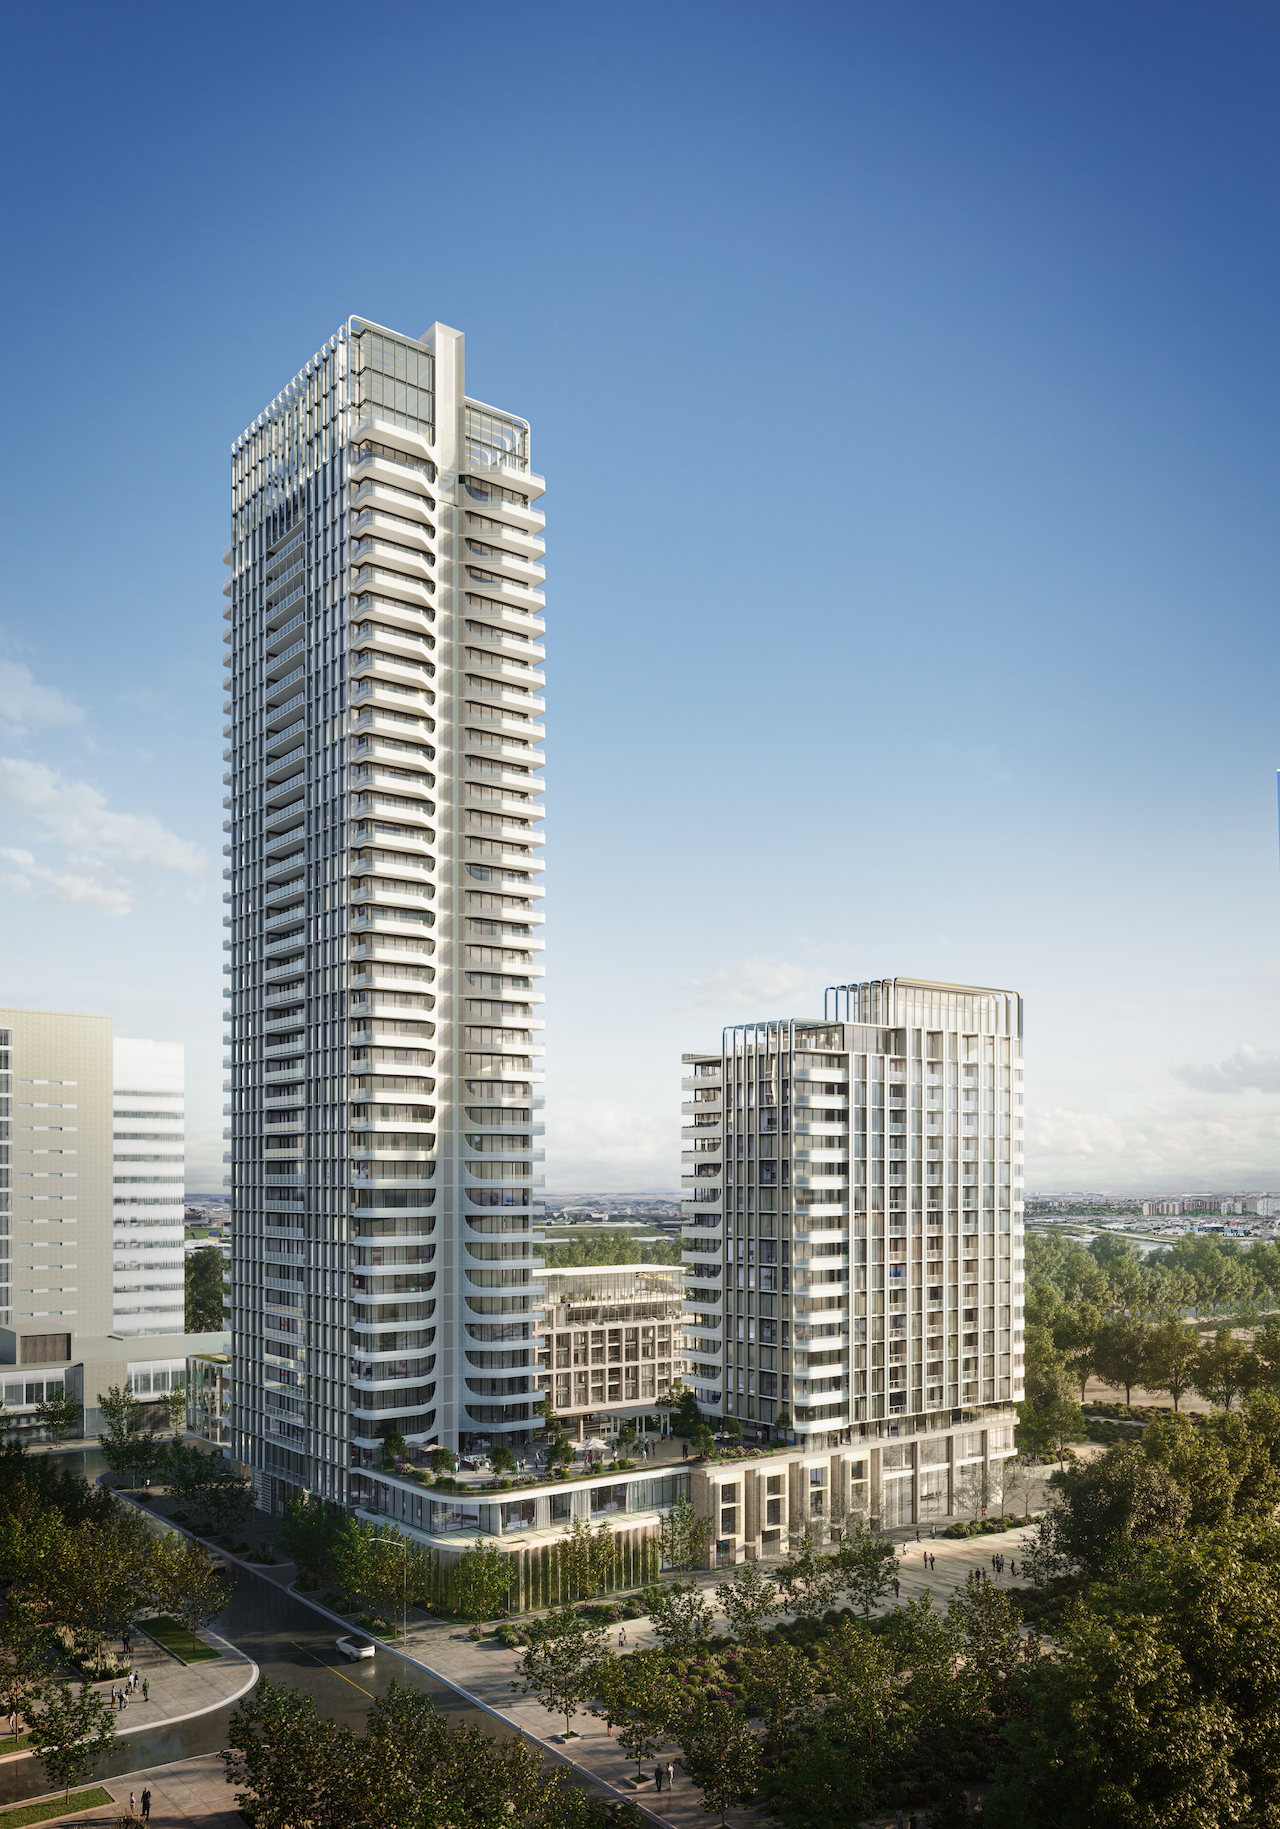 ArtWalk Condos Phase 1 at Smart VMC, Vaughan, designed by Hariri Pontarini Architects for SmartCentres REIT